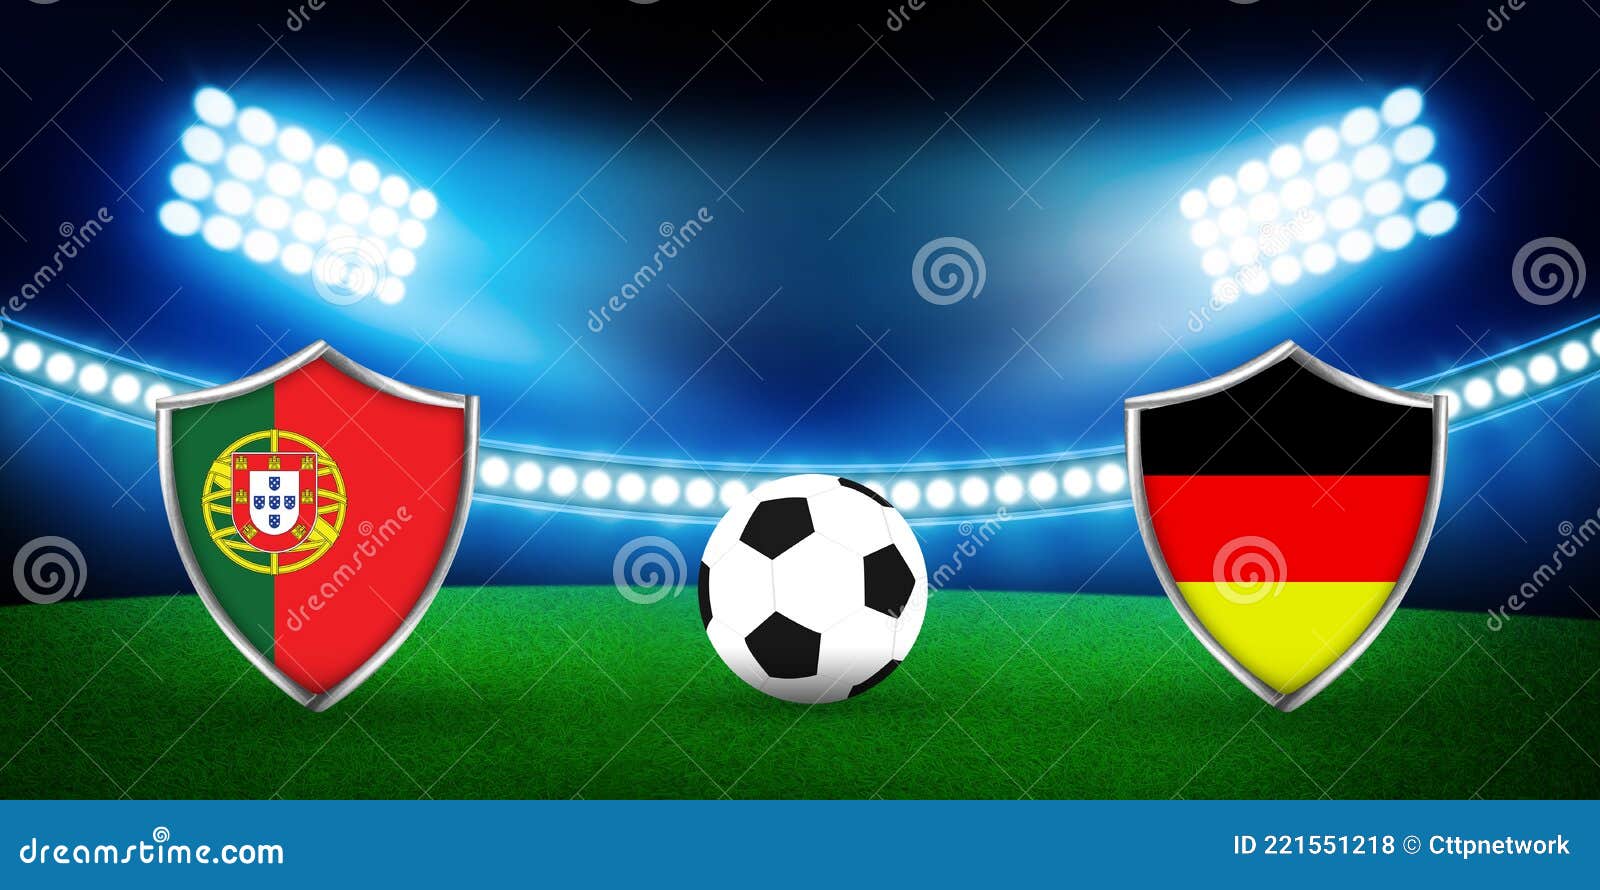 Portugal Vs Germany Football Match Latest Sports Concept Background with Stadium and Glowing Bright Lights Stock Illustration